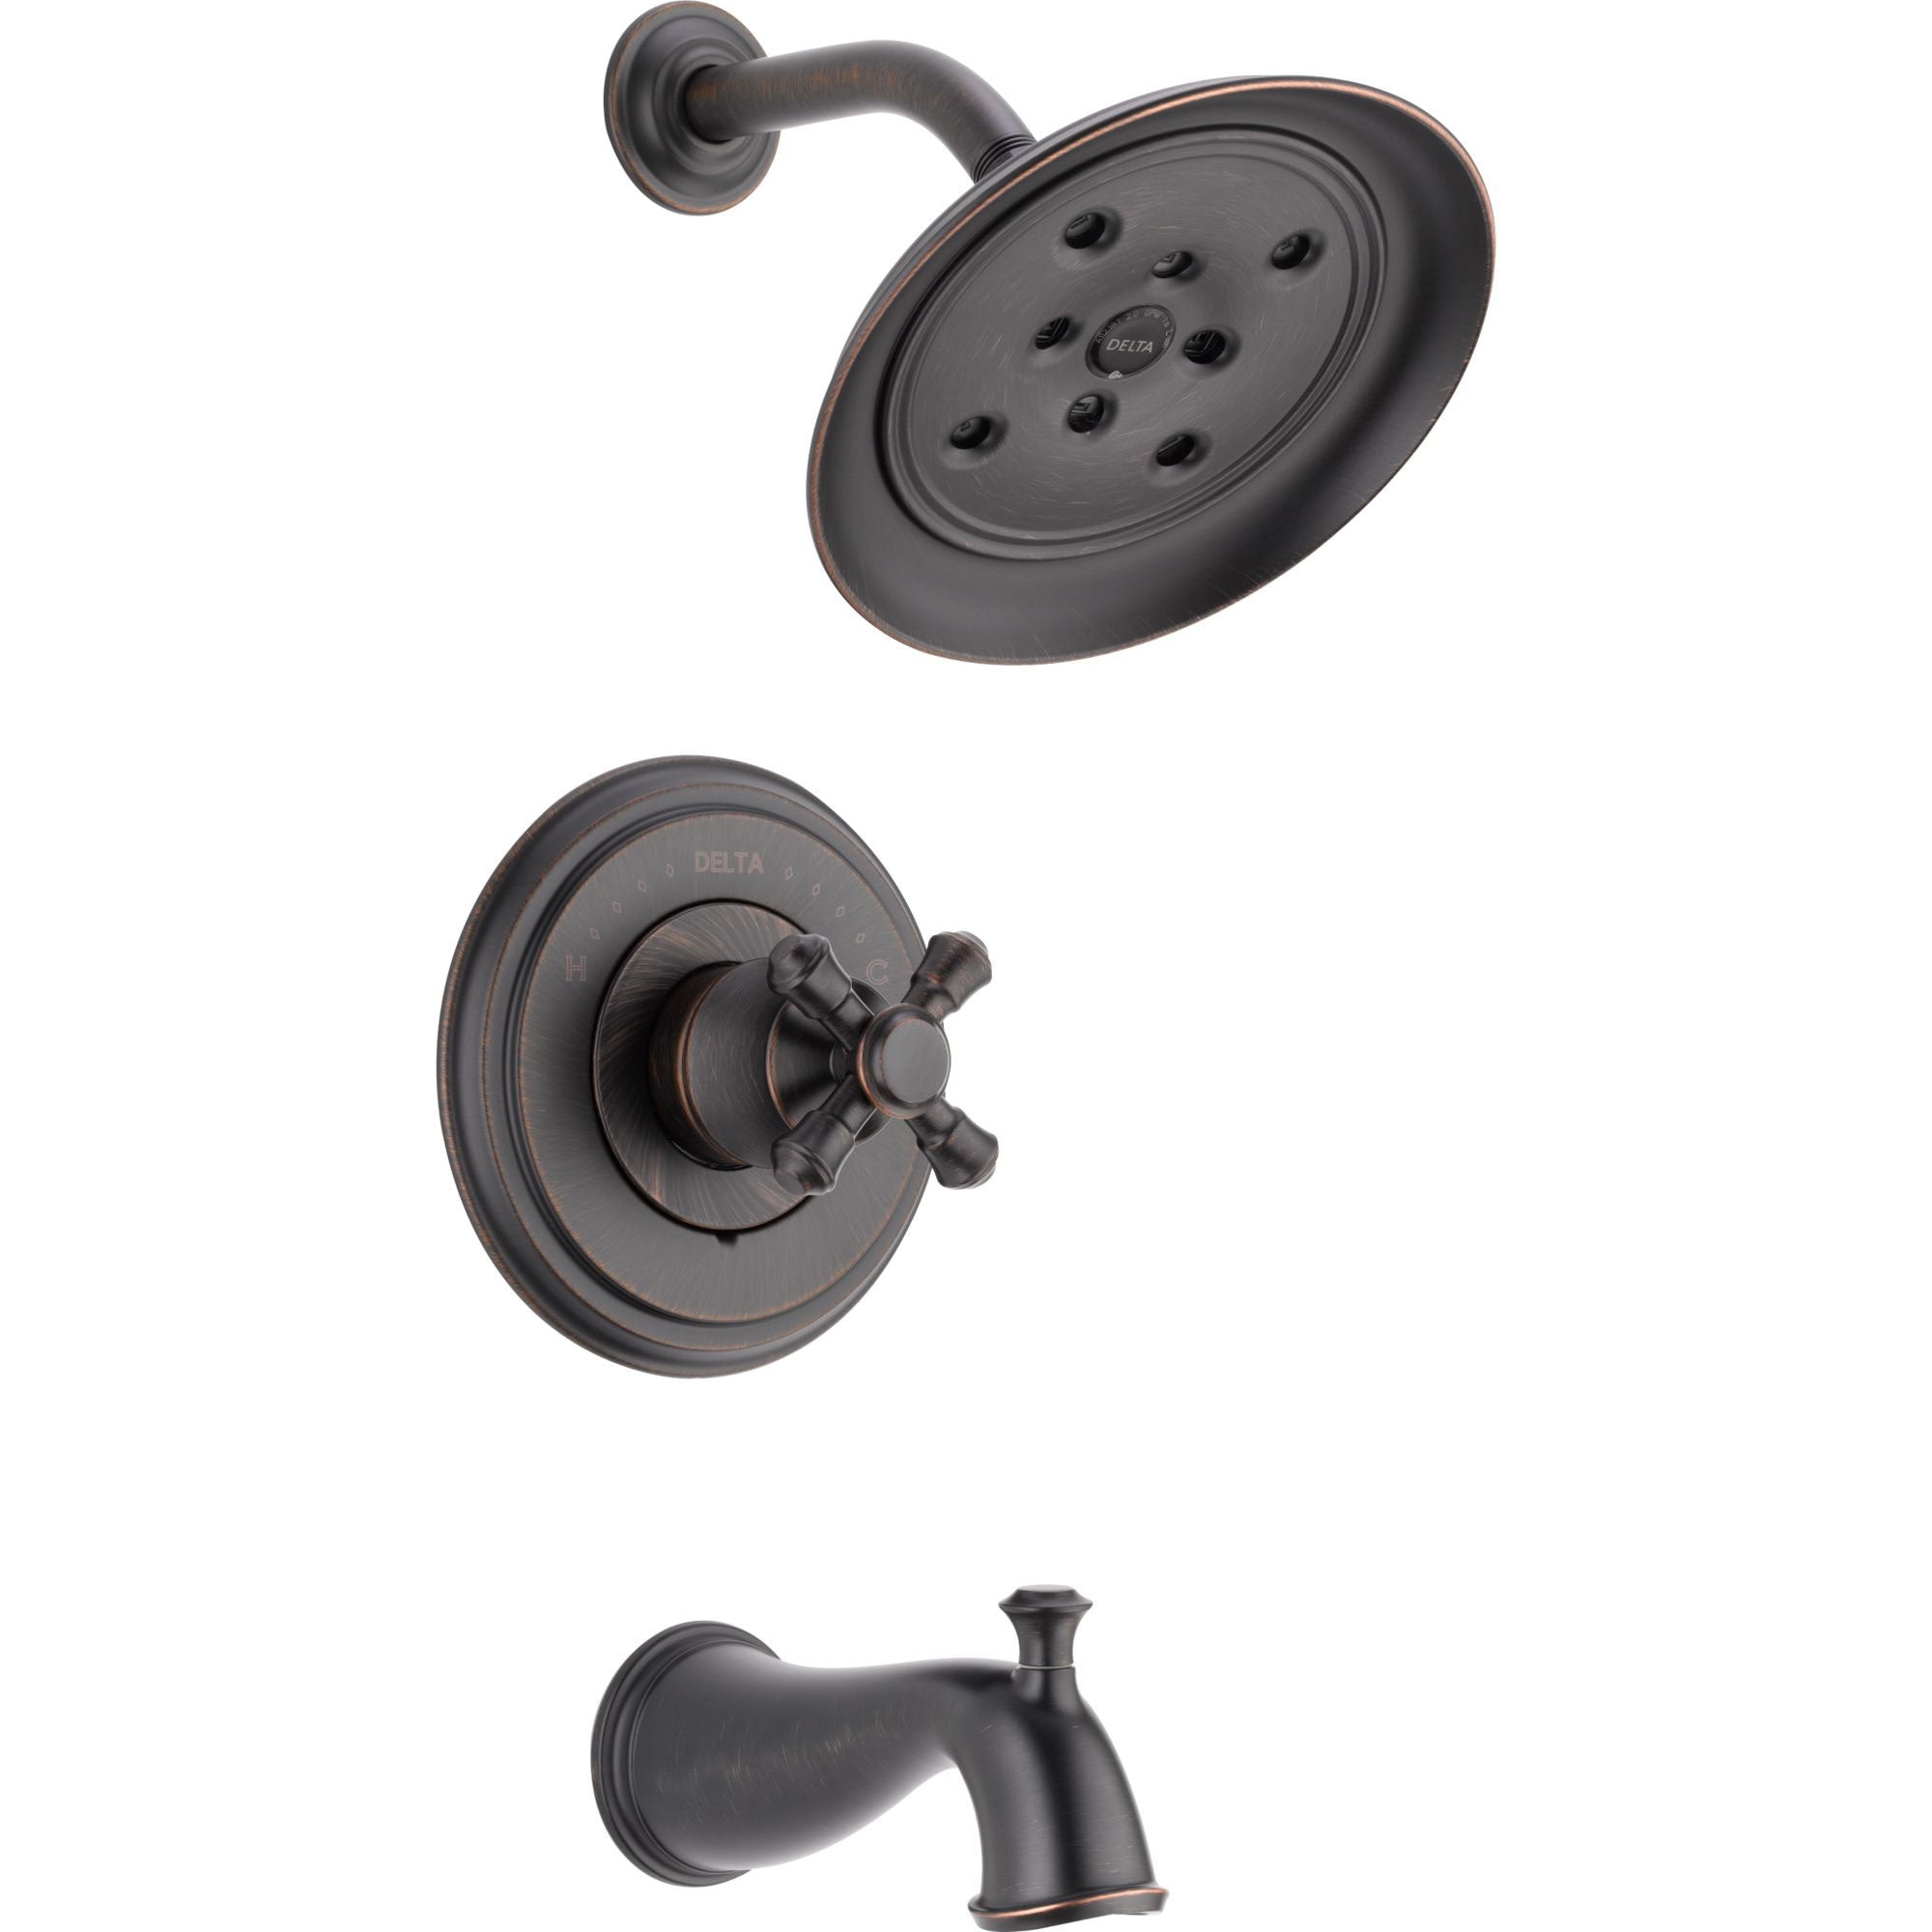 Moen Halle Spot Resist Brushed Nickel Posi-Temp Tub and Shower Trim Kit  Featuring Showerhead, Shower Lever Handle, and Tub Spout with Valve  Included